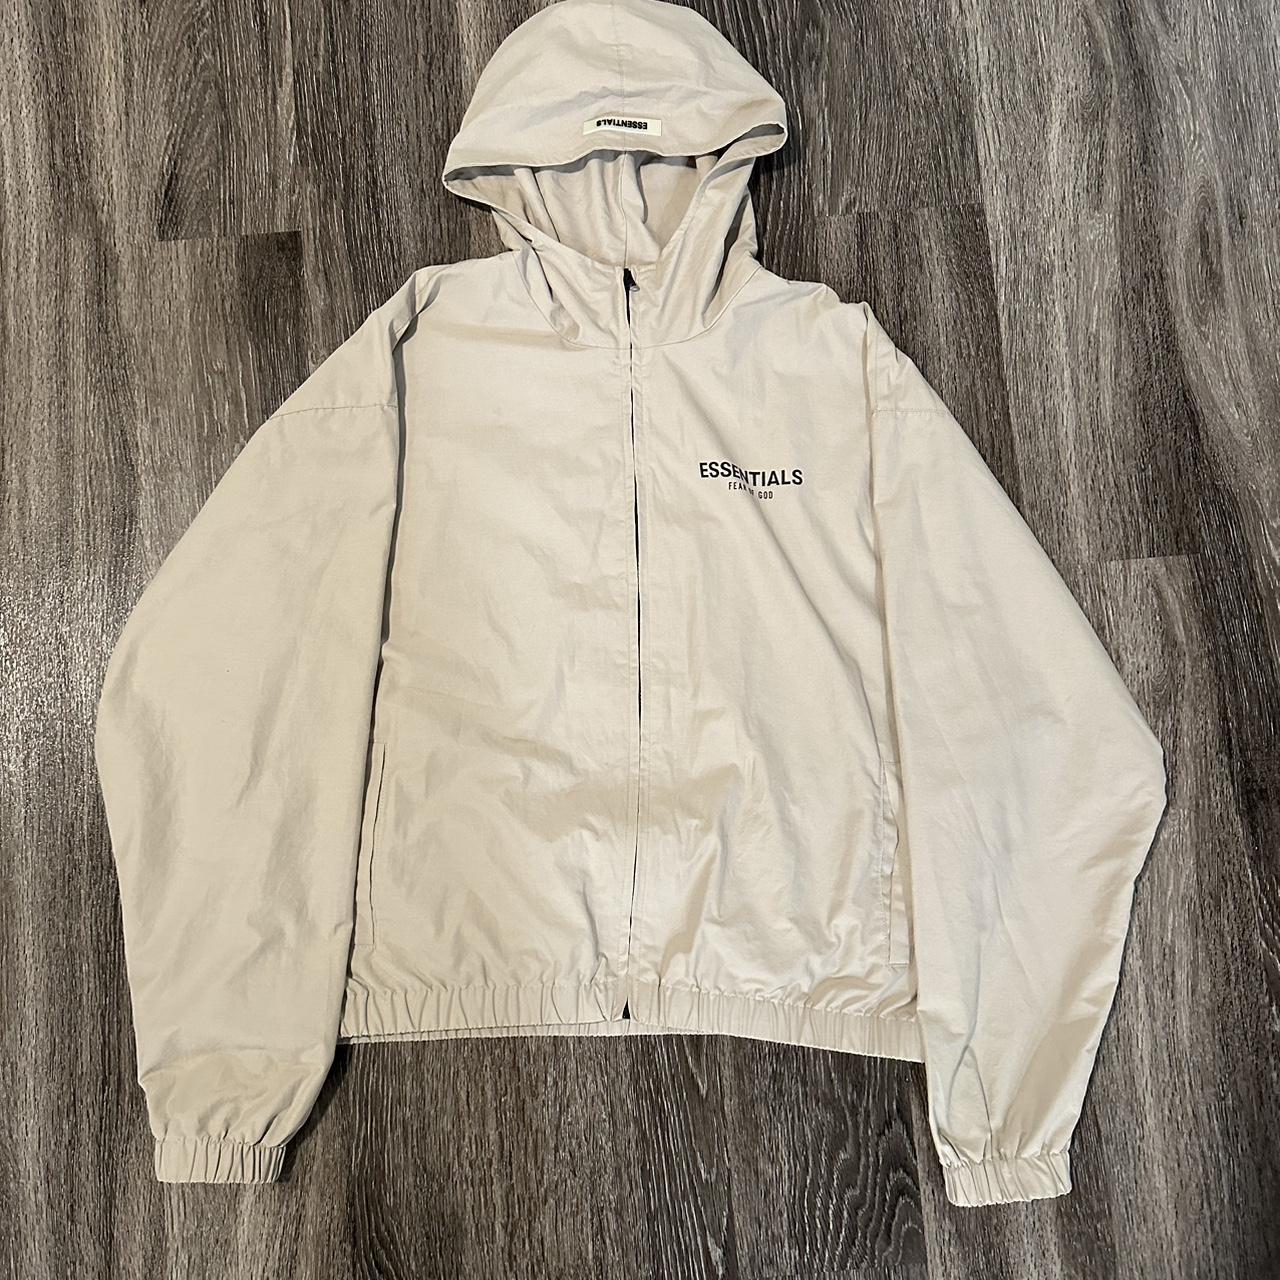 Fear of God Essentials windbreaker with reflective... - Depop